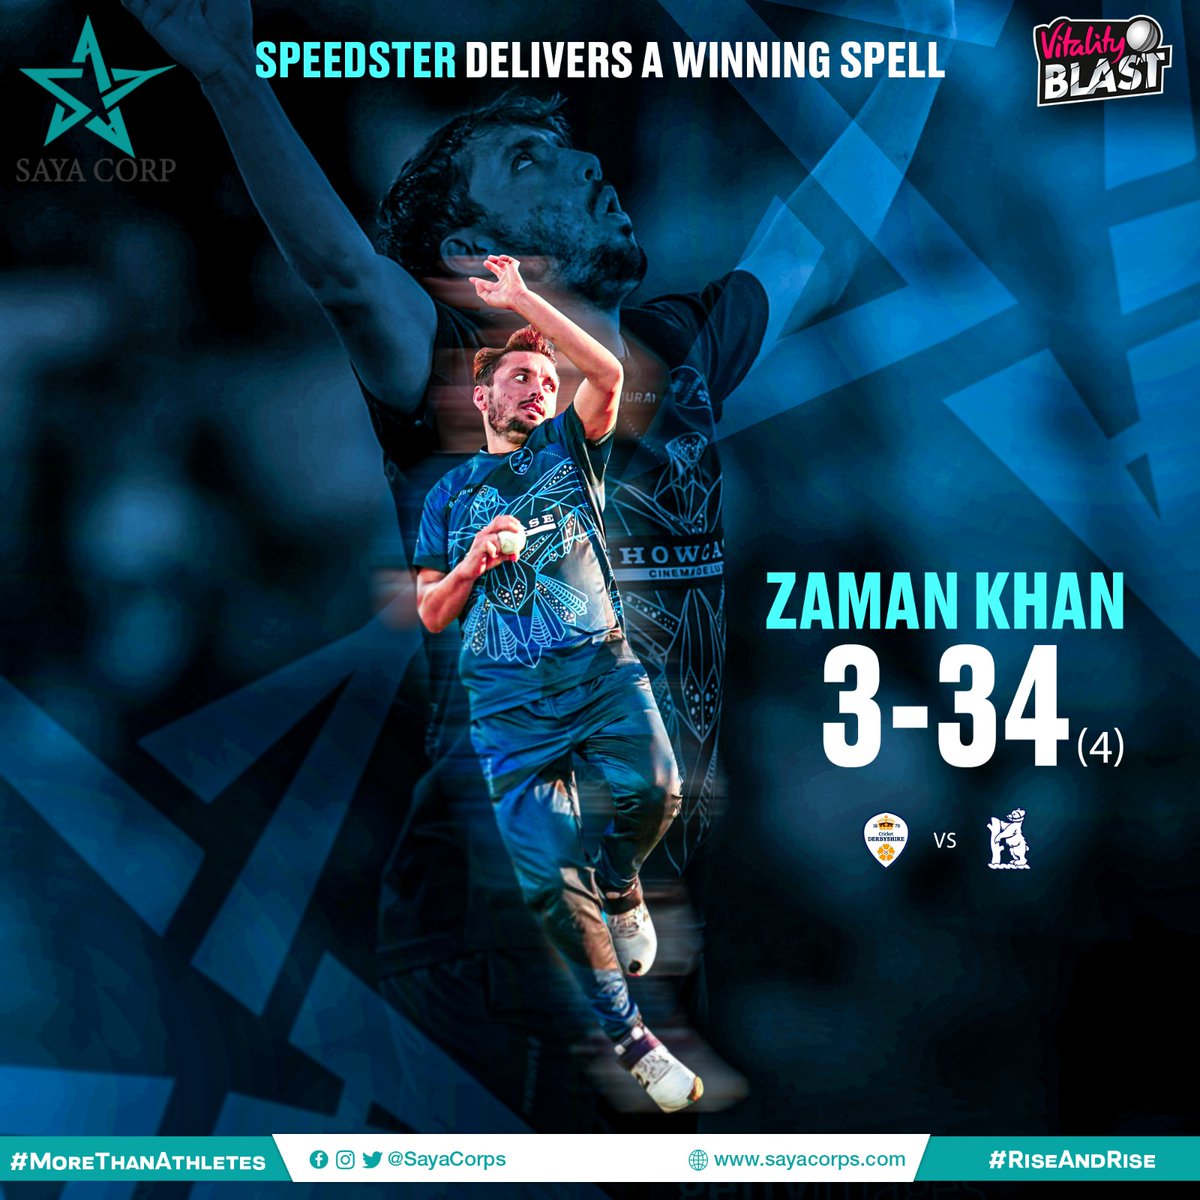 3️⃣ for 3️⃣4️⃣ for @ZamanKhanPak 👏🏻

The #SayaCorporation rising star just keeps getting better and better, his impressive spell helped his team defend the target.

He now has 8️⃣ wkts in the tournament and continues to #RiseAndRise in the charts 📈

#MoreThanAthletes @TalhaAisham